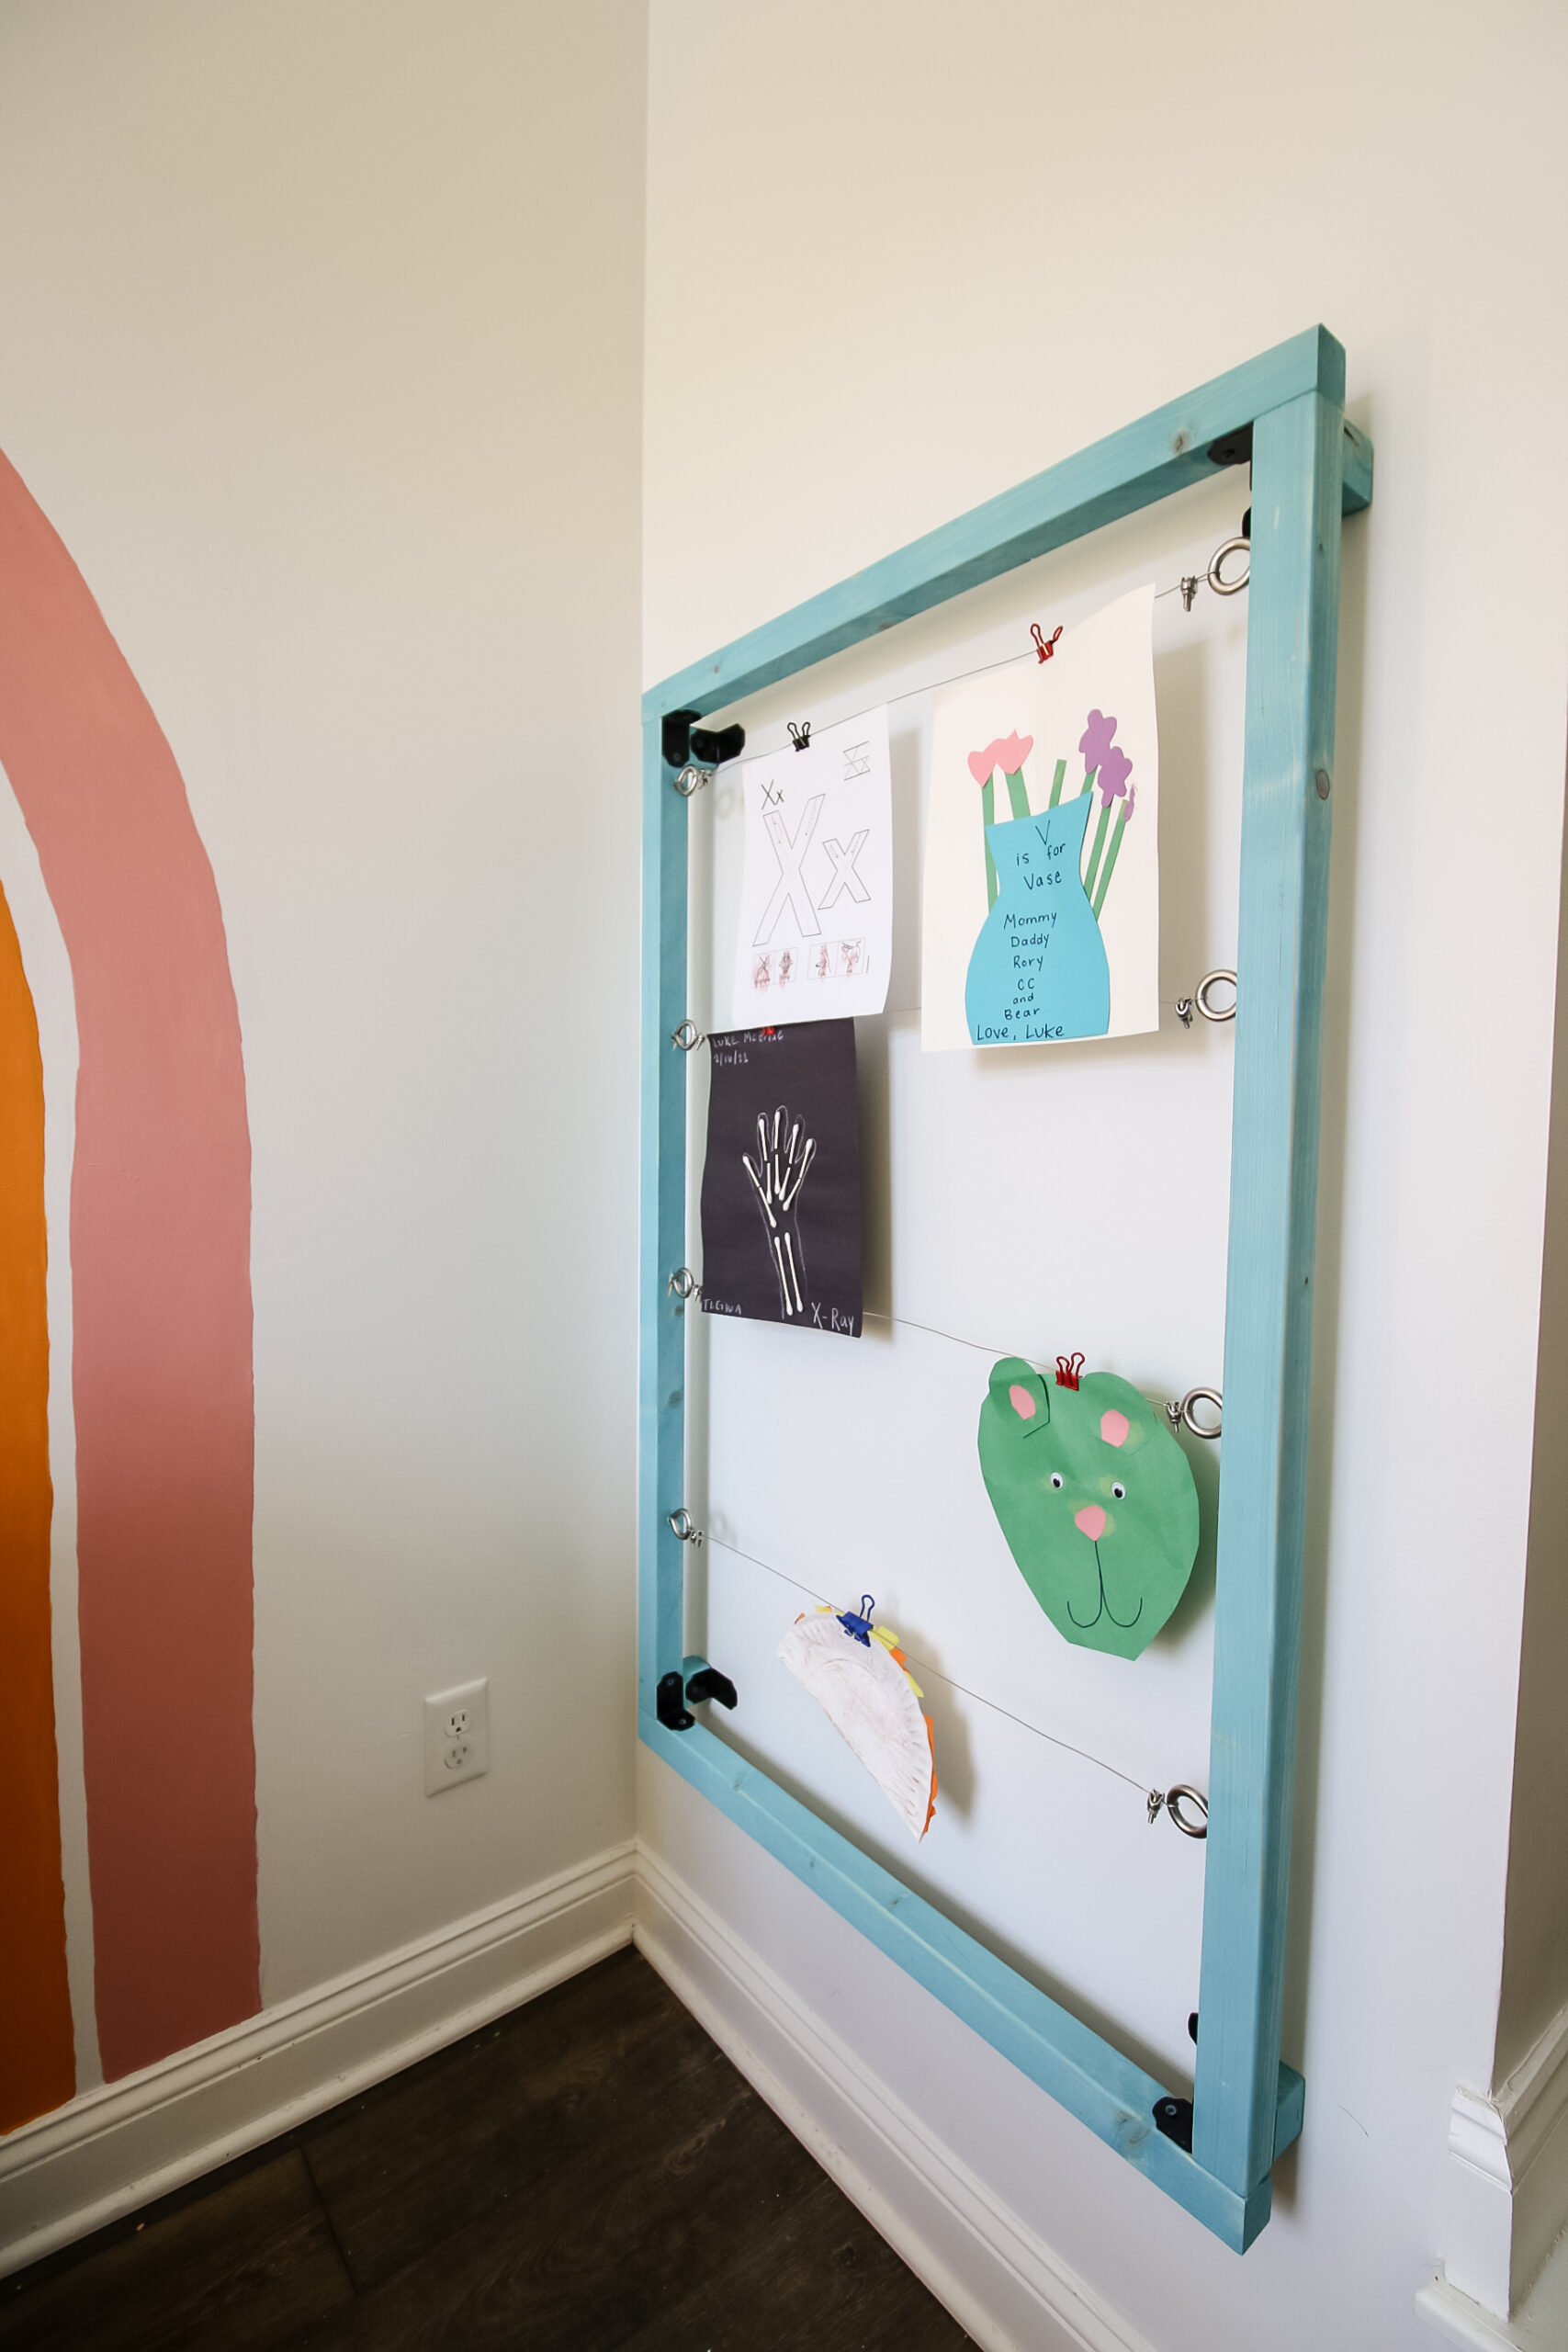 DIY Picture Hanger: A Cheap and Easy Way to Display Wall Art